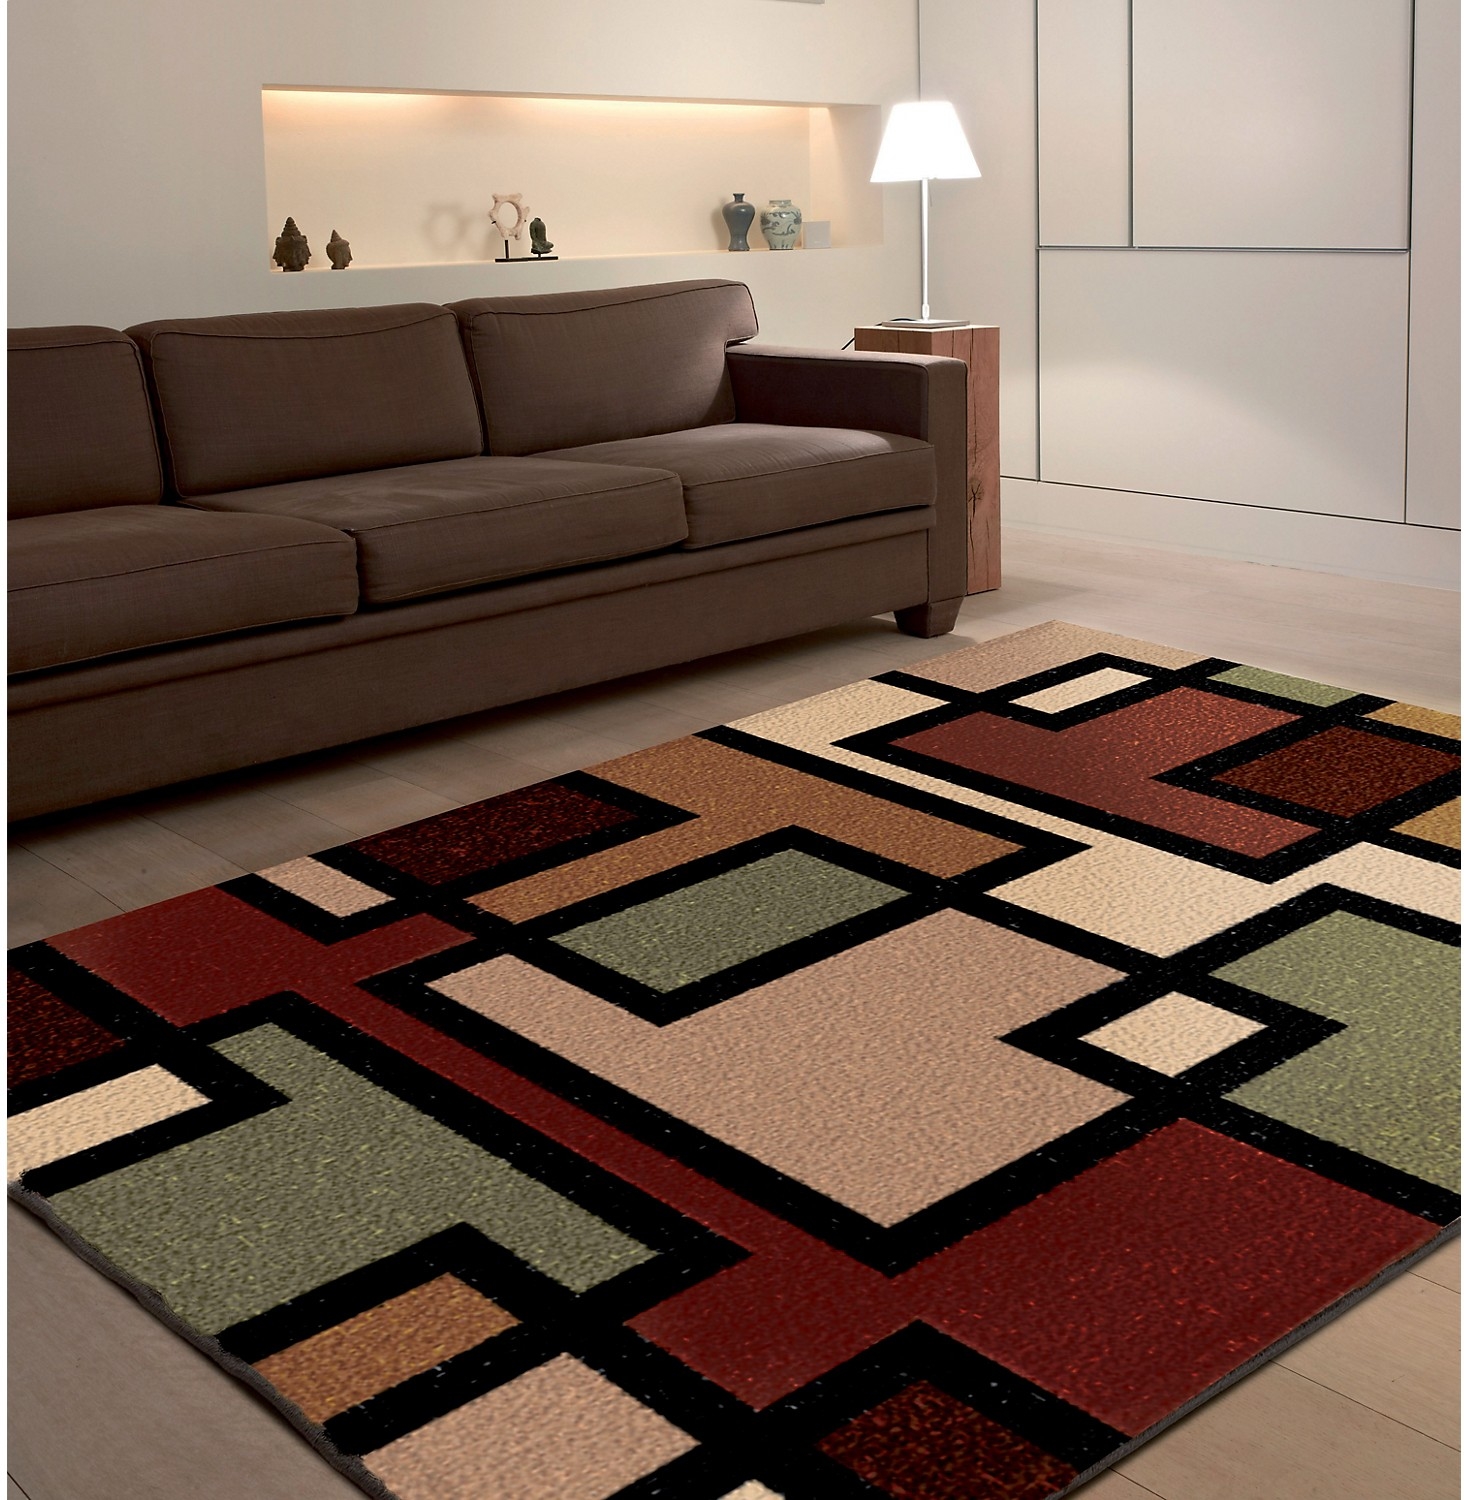 AREA RUGS RIVERSIDE CARPET CLEANING